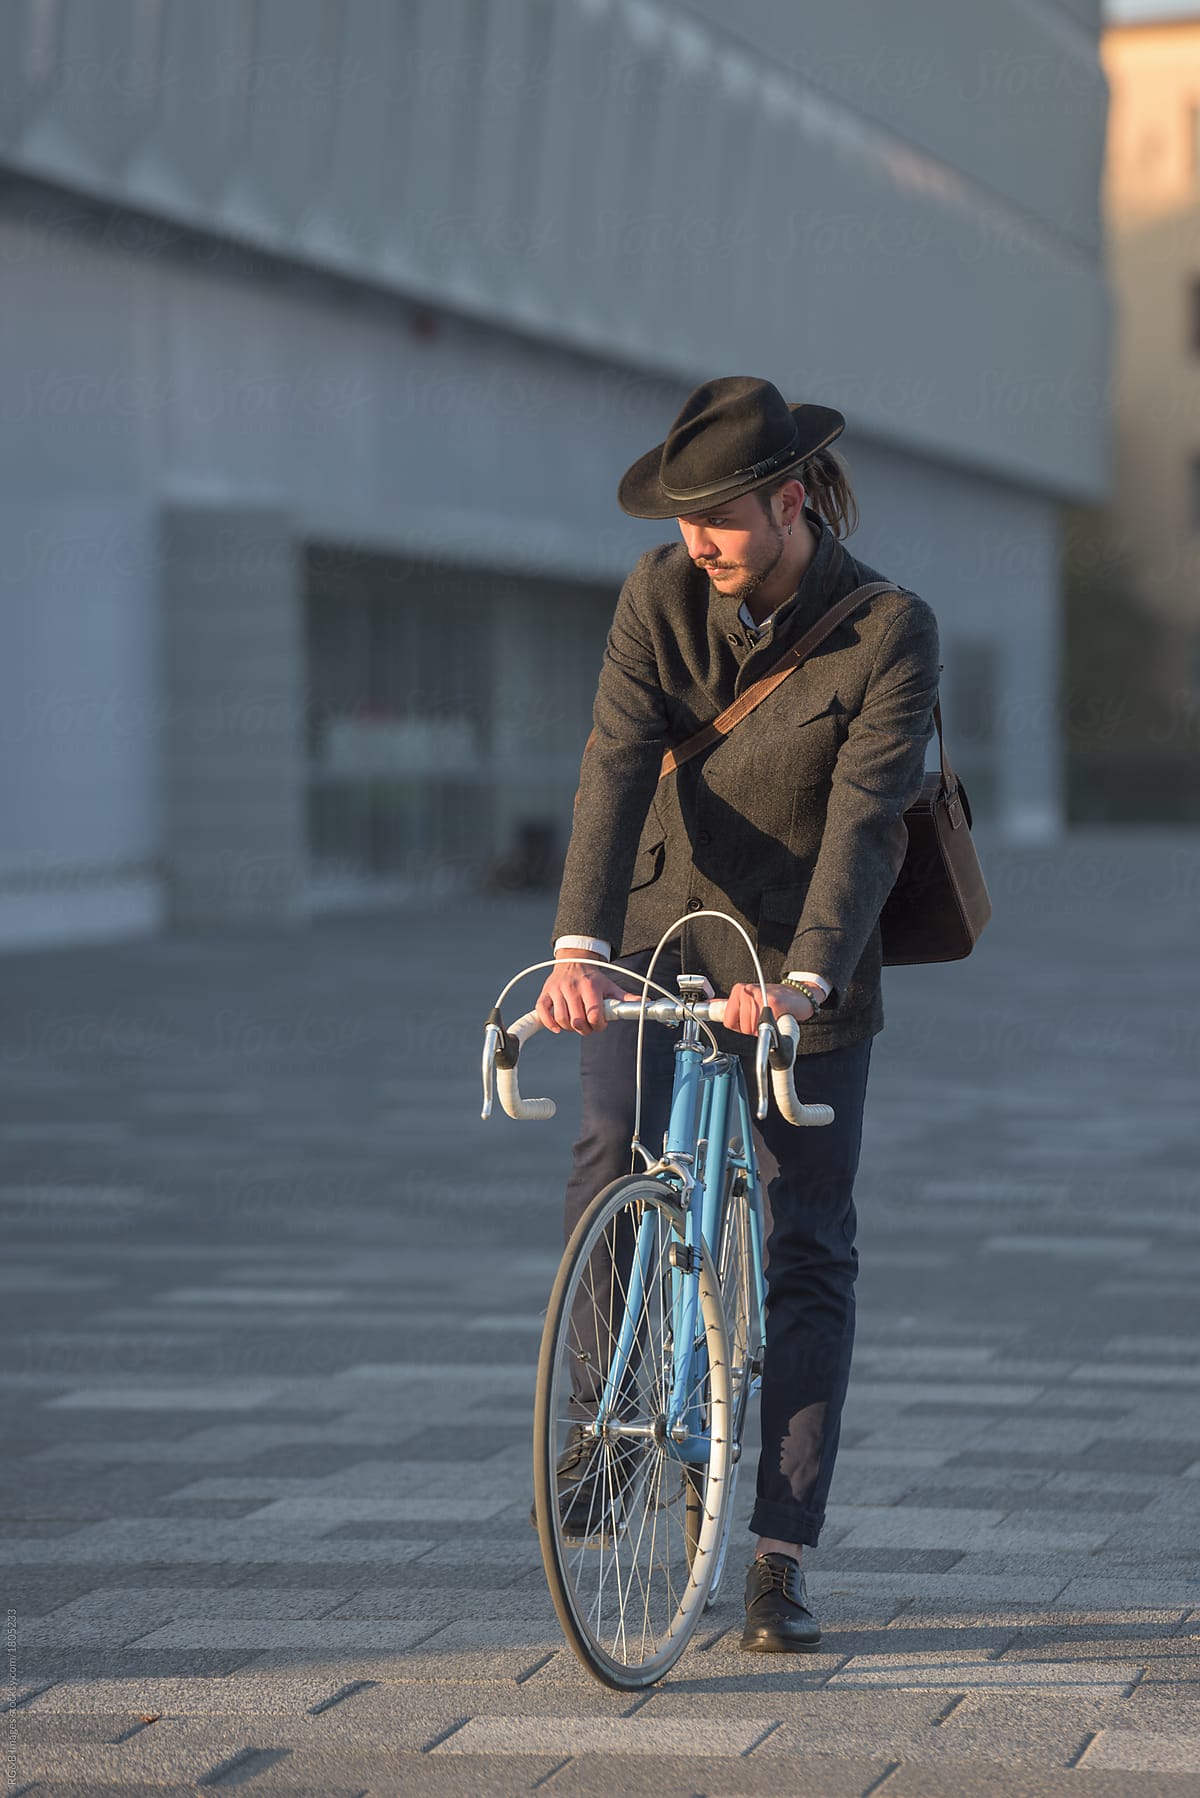 Full-length portrait of man riding city bicycle